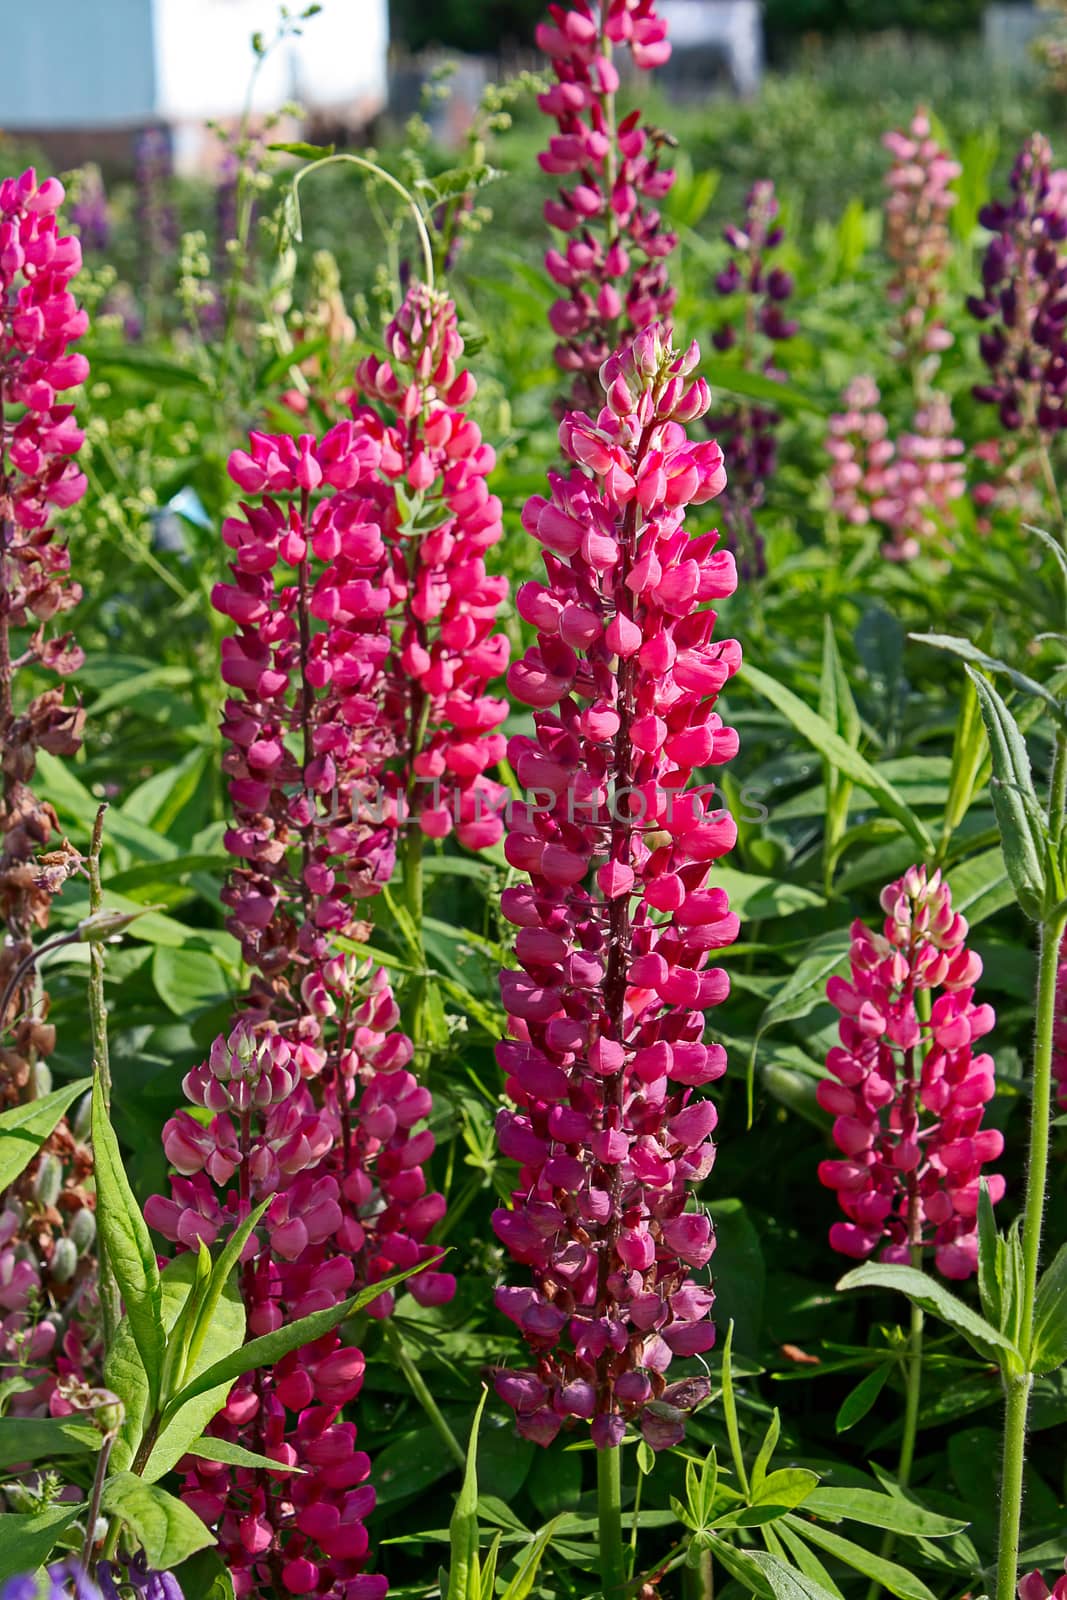 Lupine flowers closeup in a garden on a background of leaves.